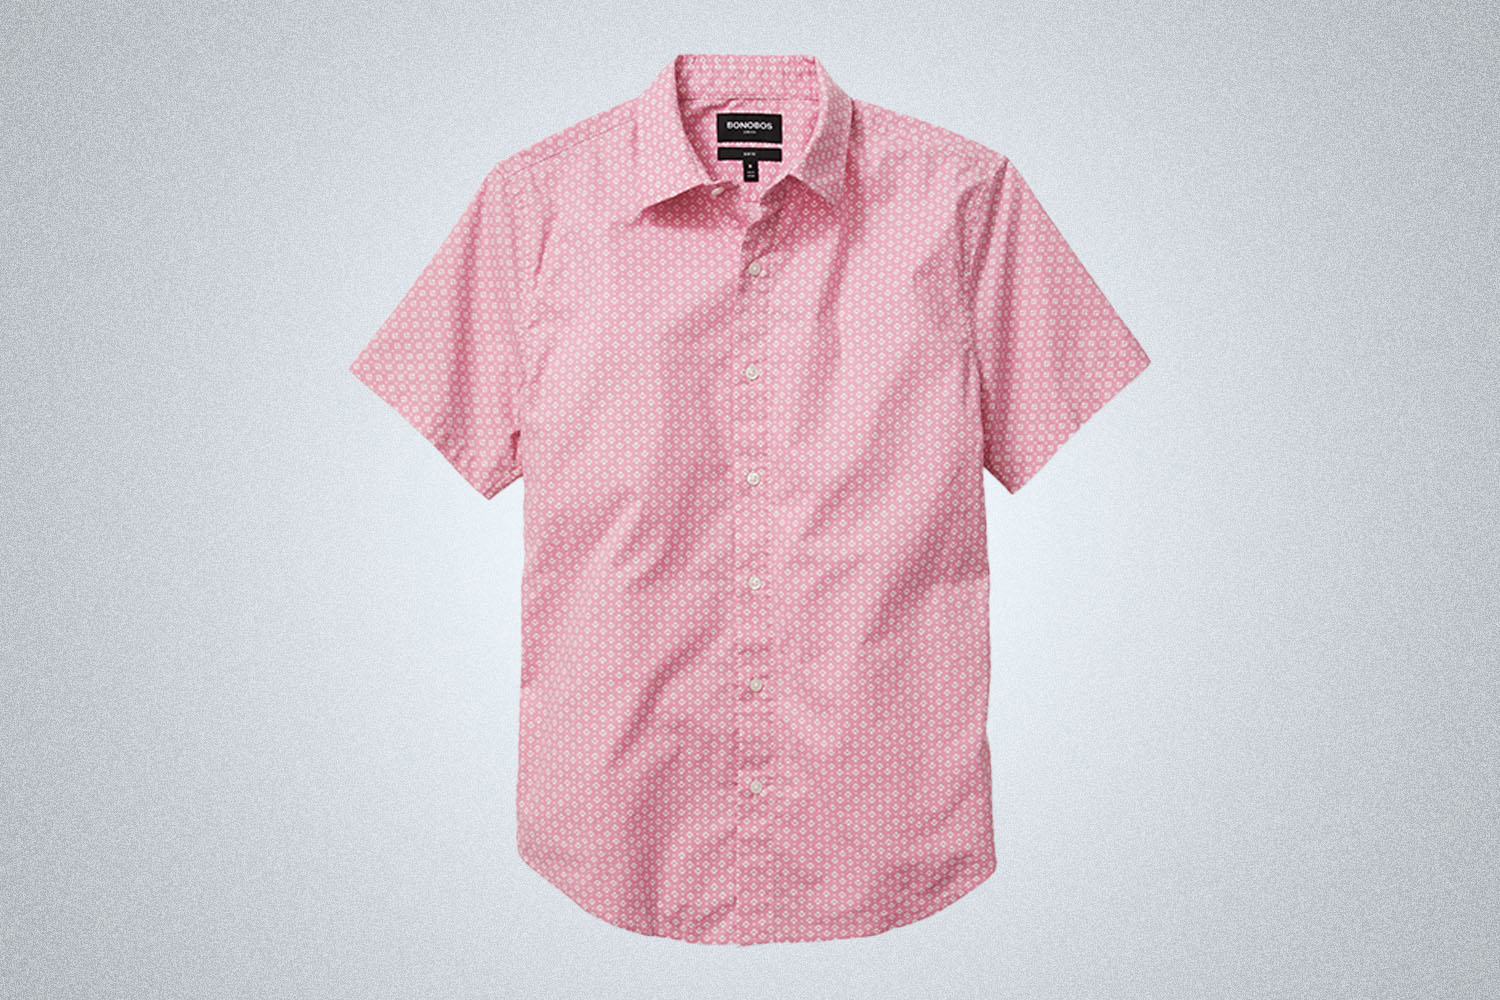 a pink button up short sleeved shirt from Bonobos on a grey background